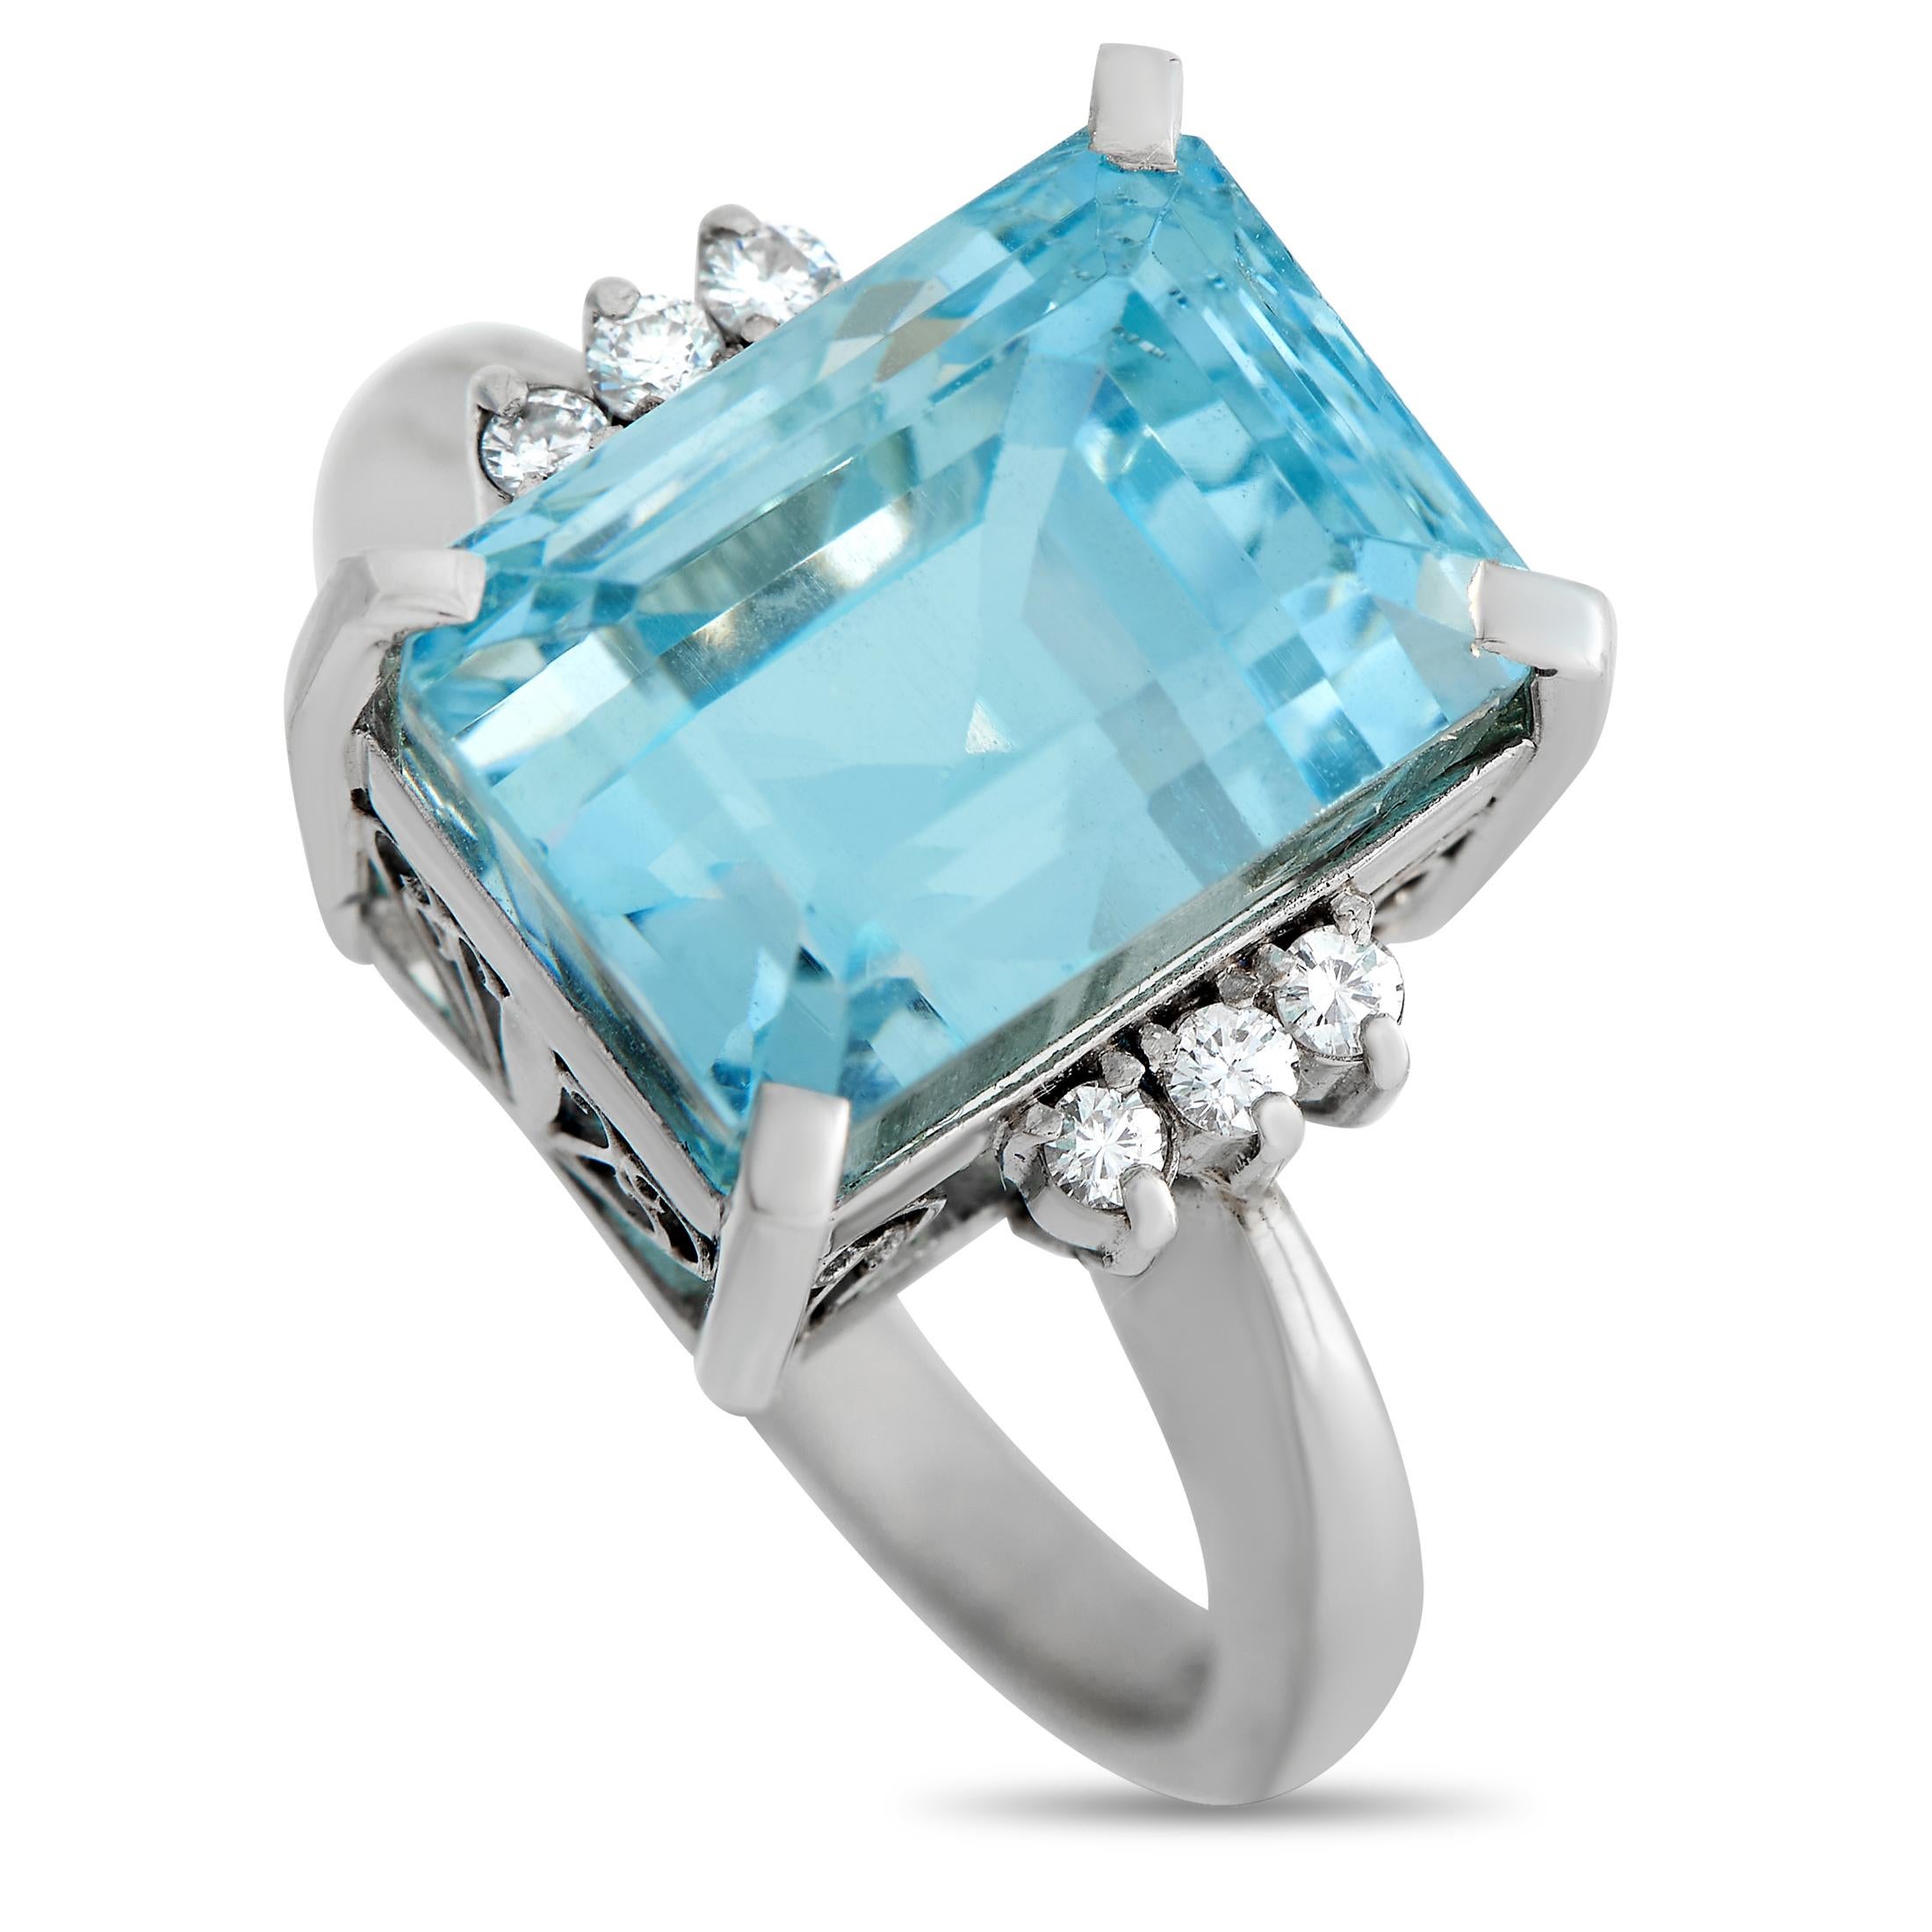 LB Exclusive Platinum 0.21ct Diamond and Aquamarine Ring In Excellent Condition For Sale In Southampton, PA